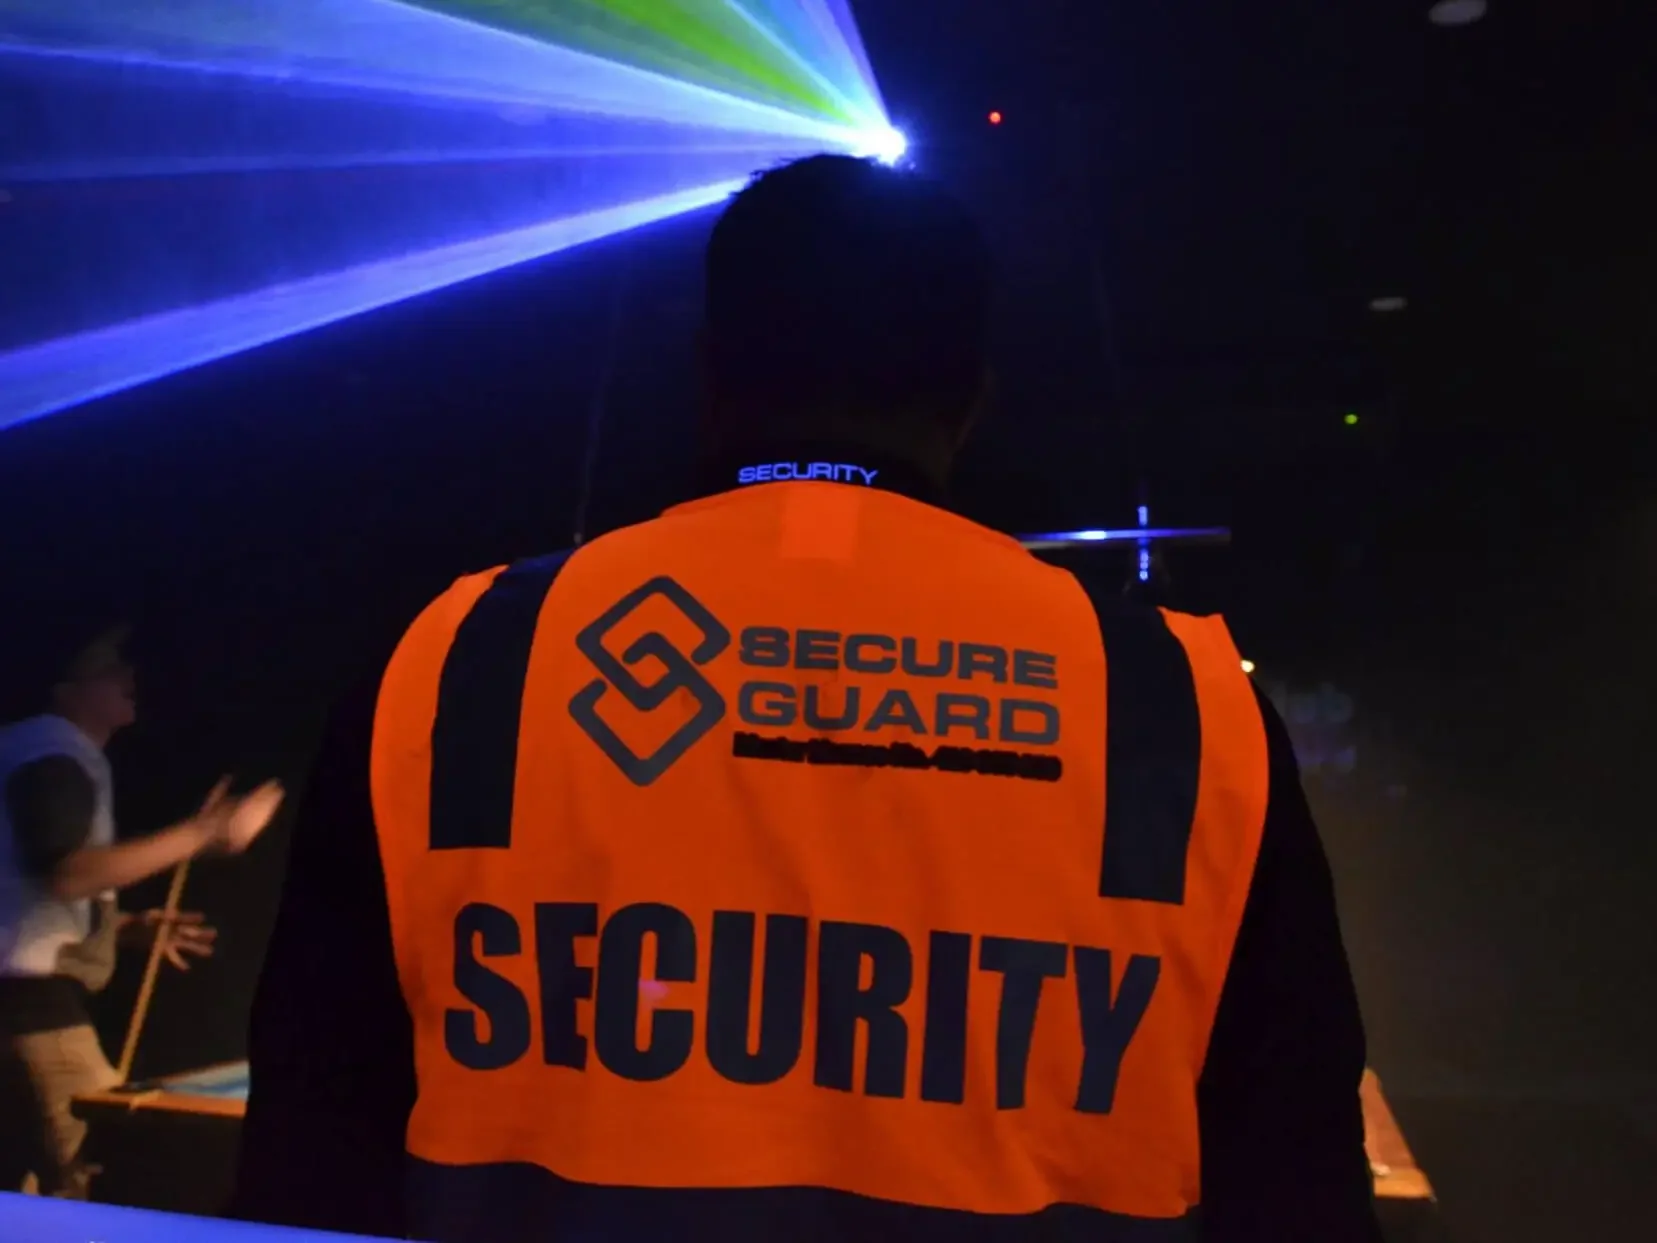 Event and venue security